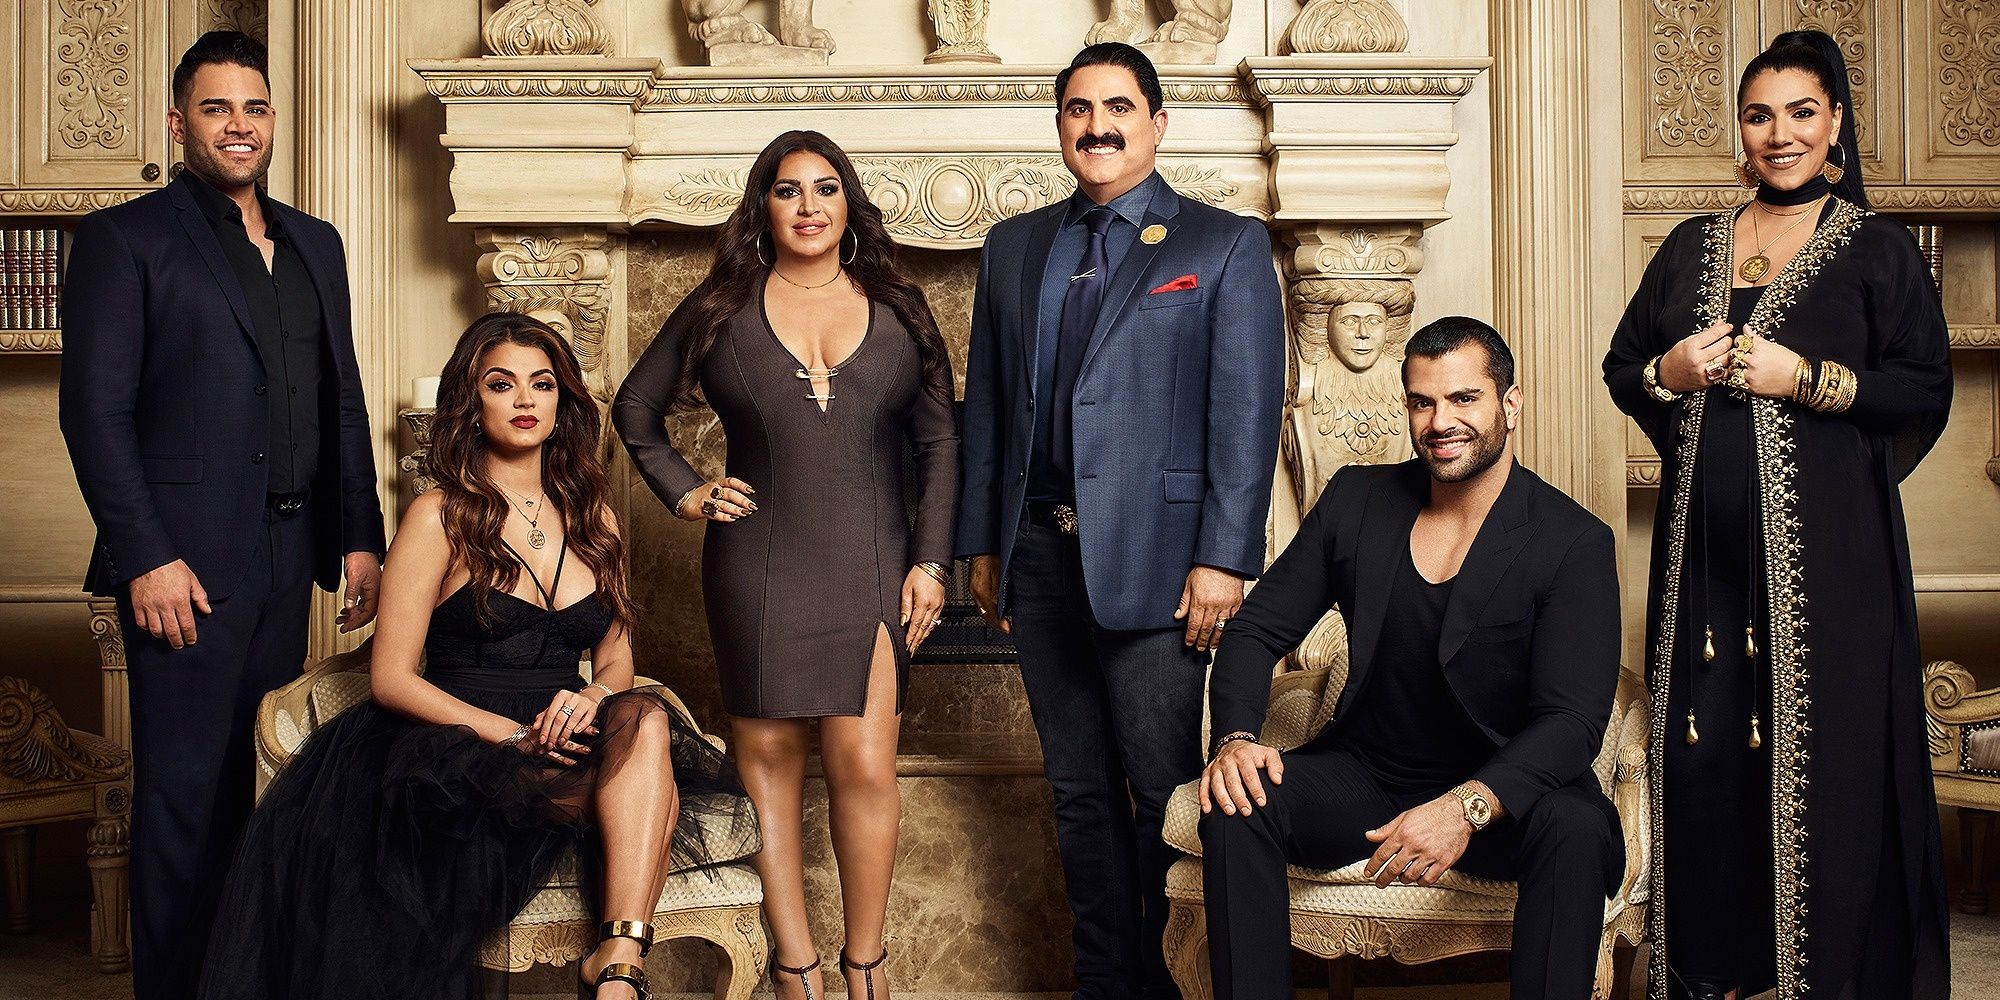 Shahs of Sunset The Cast Members' Biggest Scandals On & Offscreen